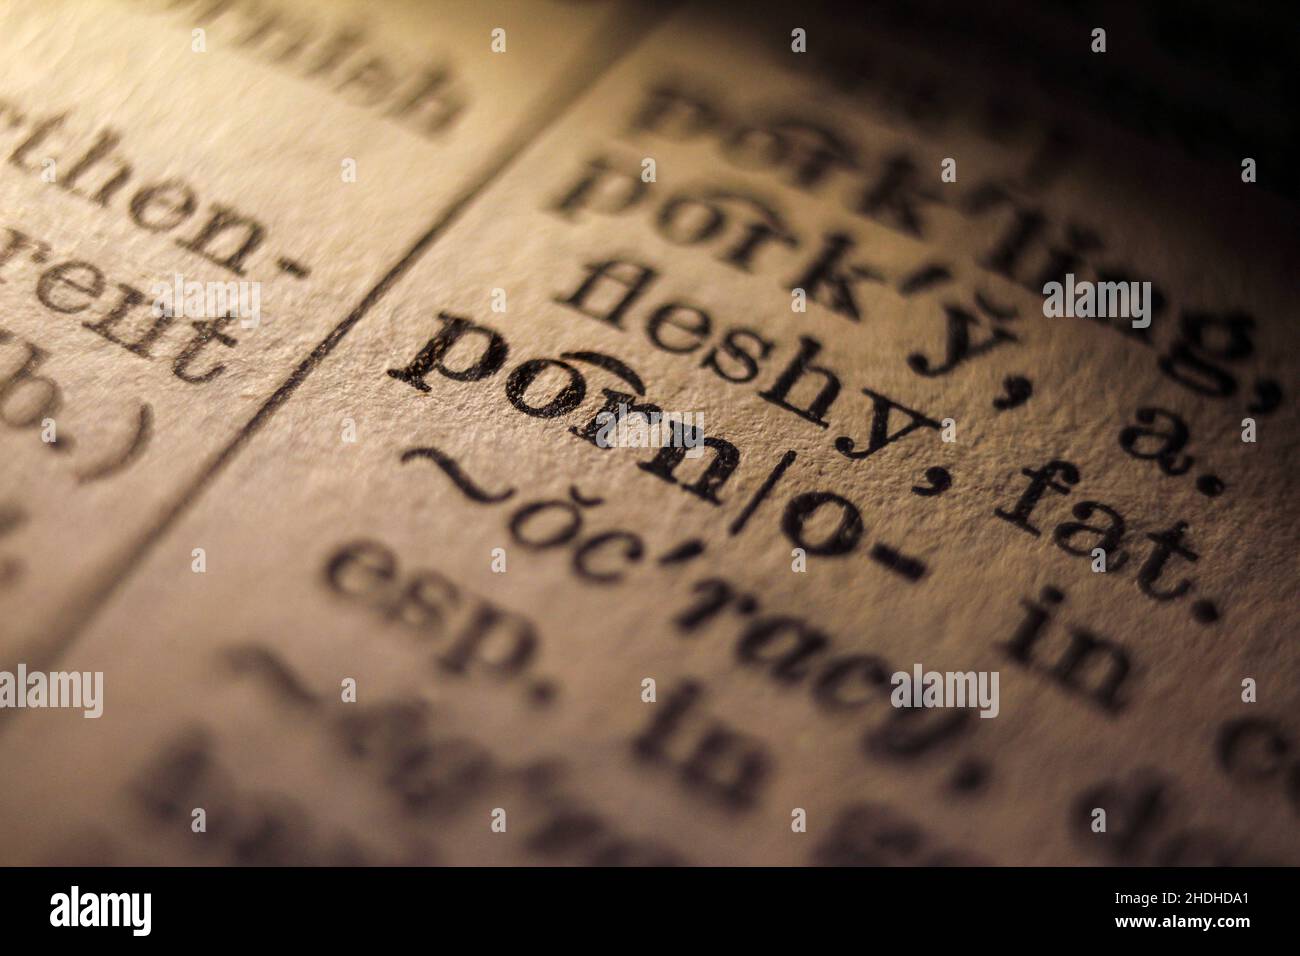 Word 'porno' and 'porn' printed on dictionary page, macro close-up Stock Photo